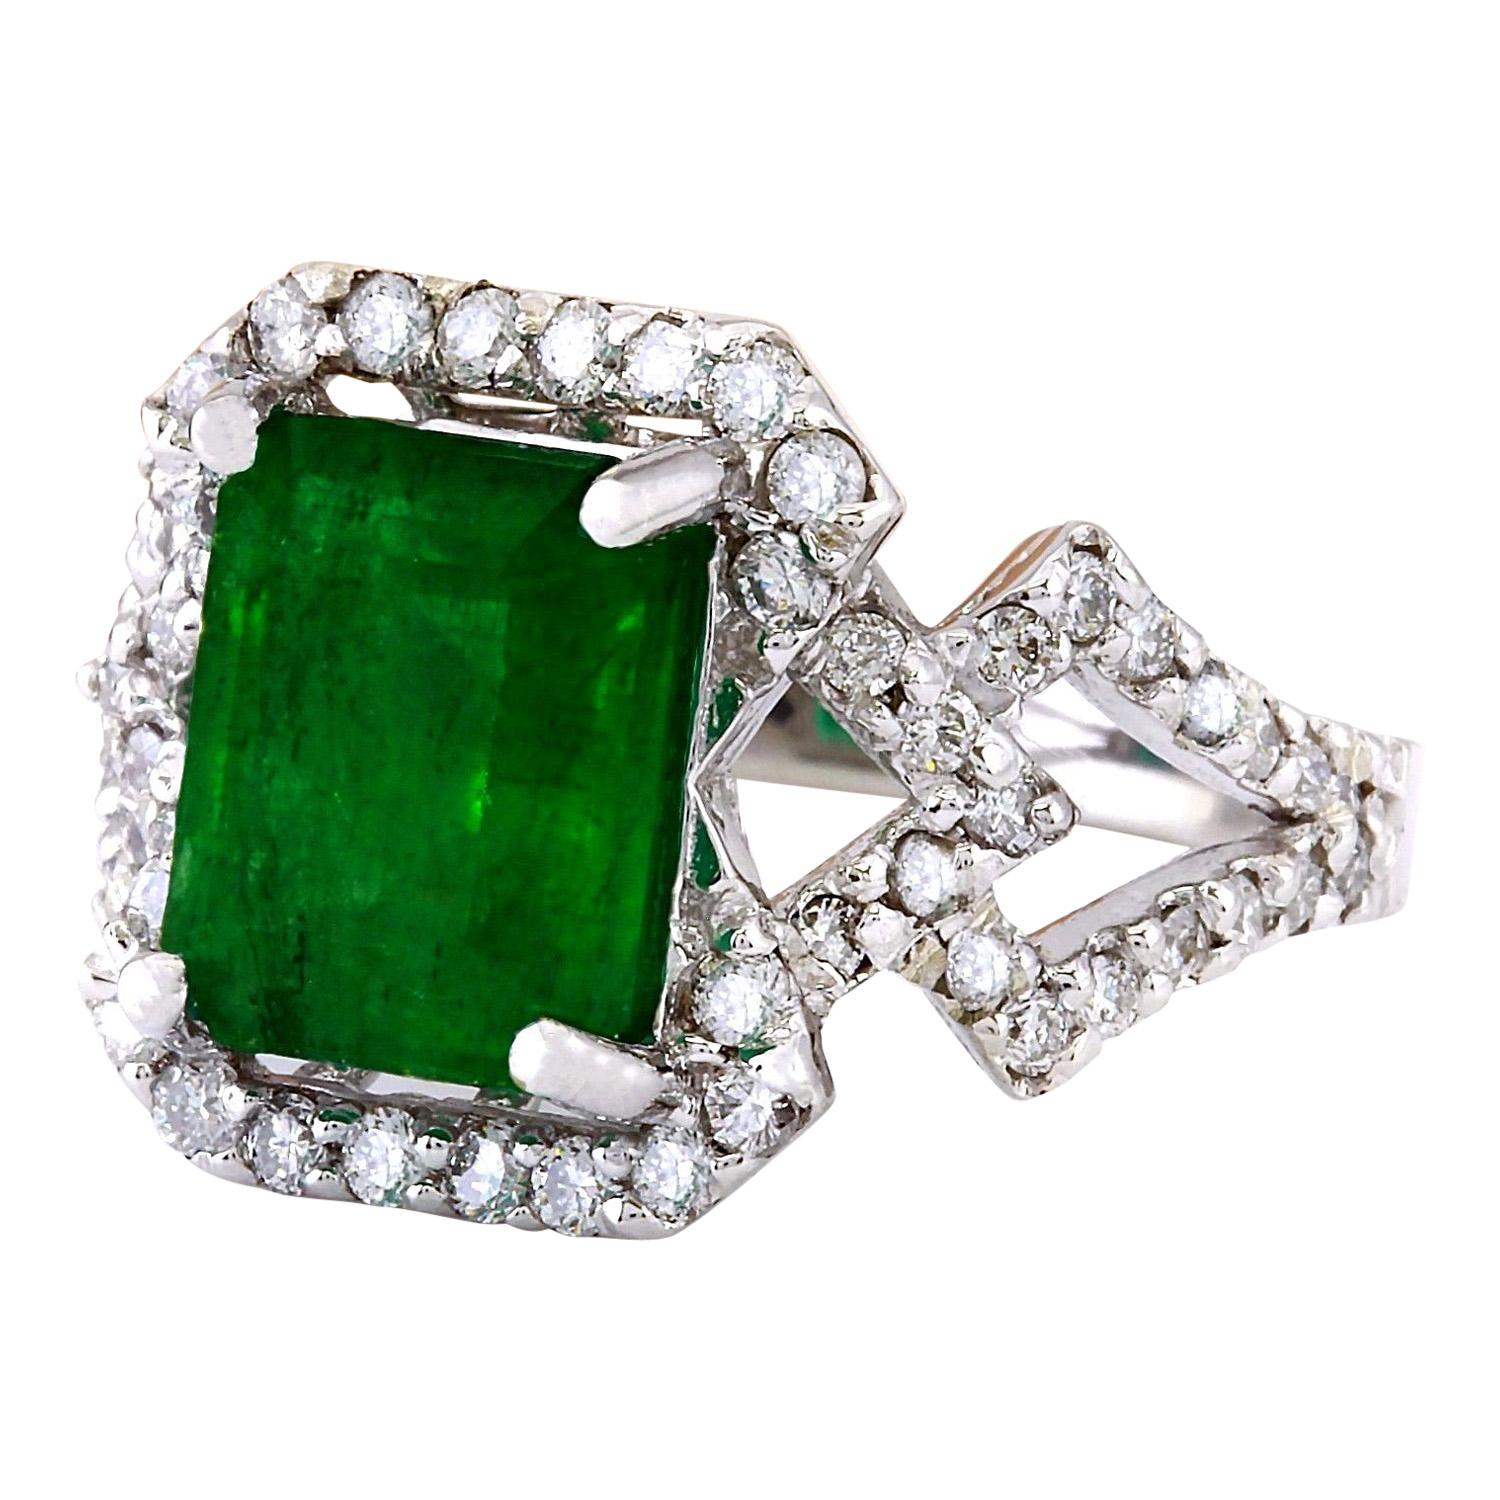 4.43 Carat Natural Emerald 14K Solid White Gold Diamond Ring
 Item Type: Ring
 Item Style: Engagement
 Material: 14K White Gold
 Mainstone: Emerald
 Stone Color: Green
 Stone Weight: 3.45 Carat
 Stone Shape: Emerald
 Stone Quantity: 1
 Stone